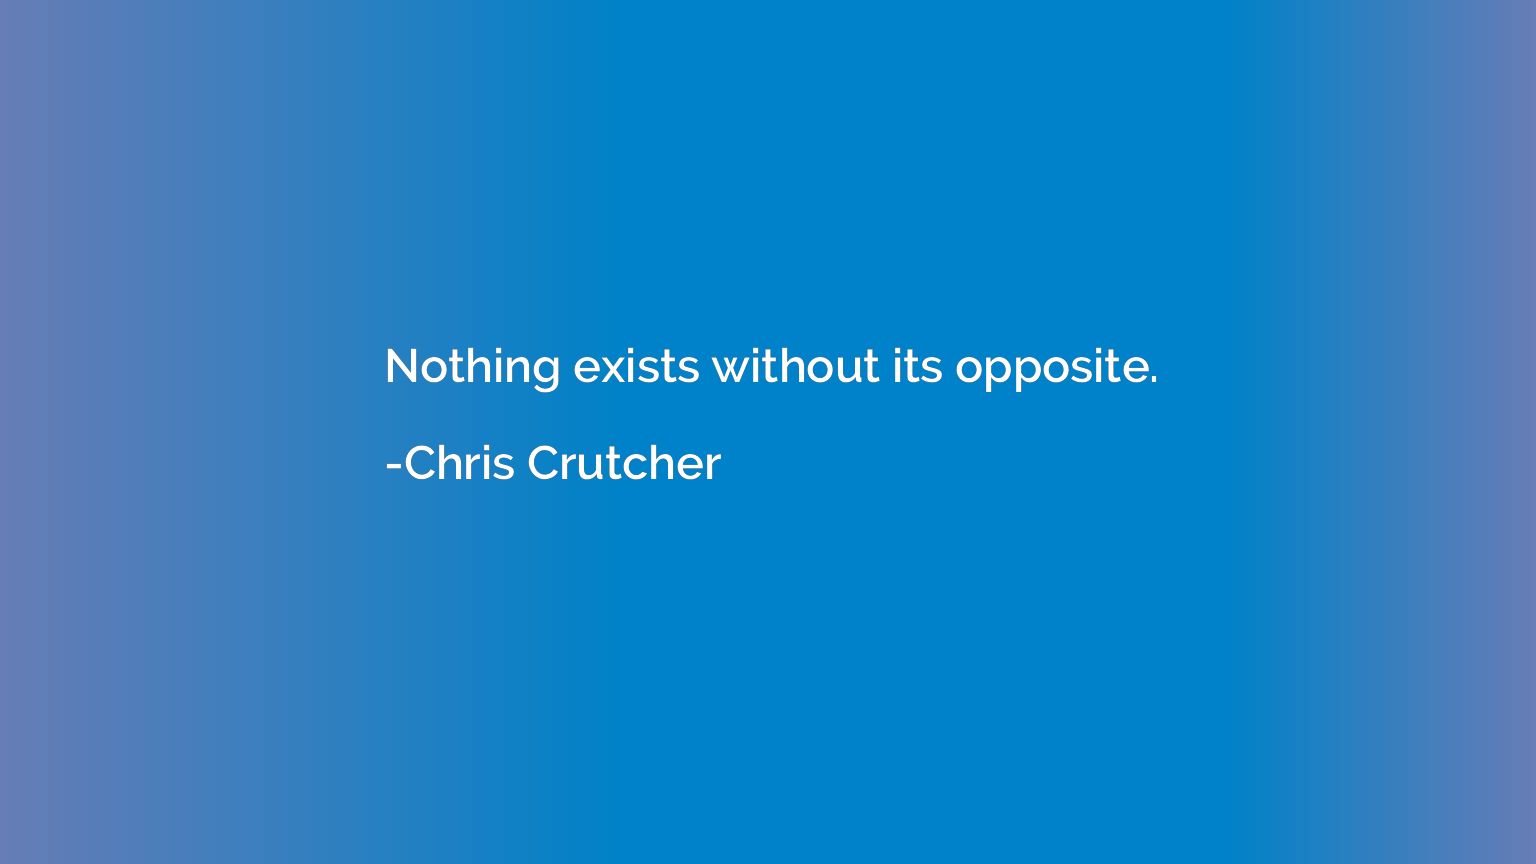 Nothing exists without its opposite.